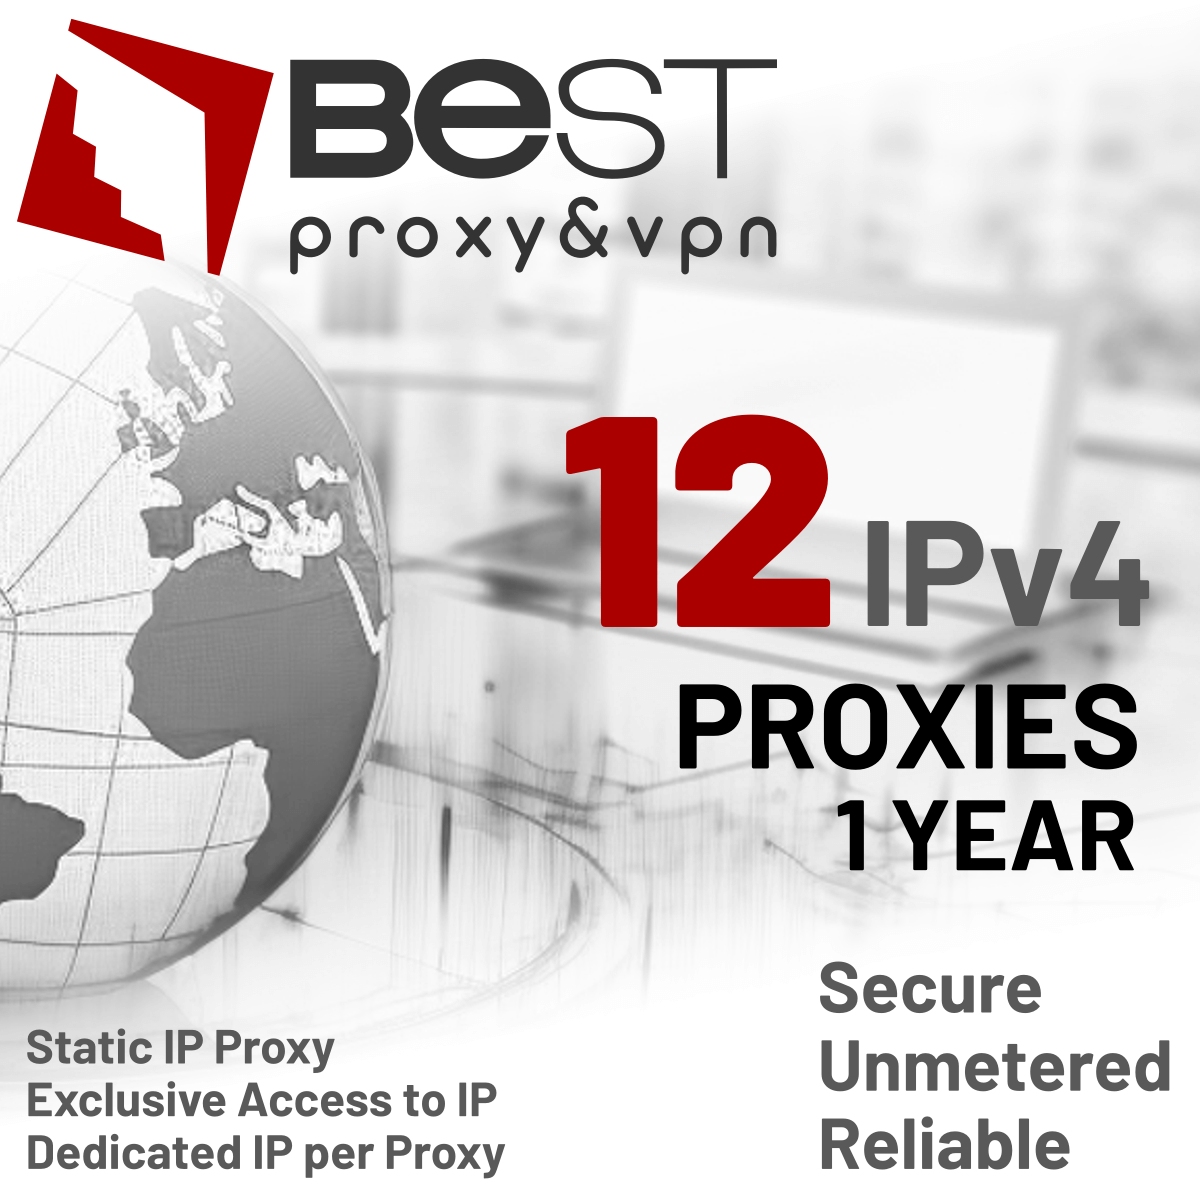 12 Private Proxies for 1 Year